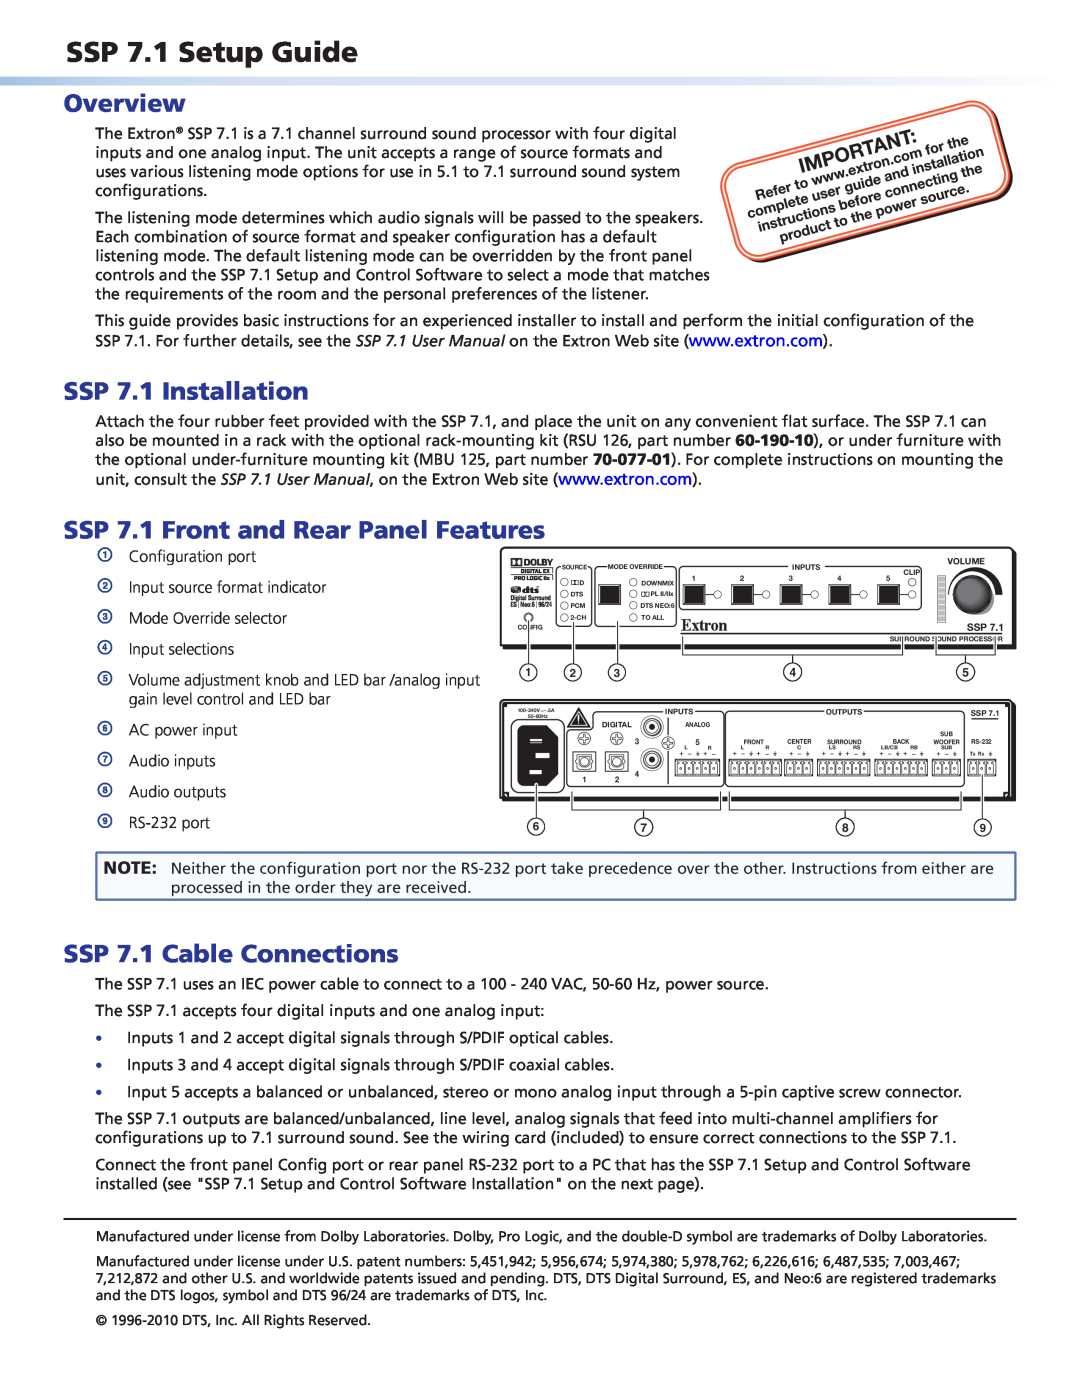 Extron electronic setup guide SSP 7.1 Setup Guide, Overview, SSP 7.1 Installation, SSP 7.1 Cable Connections 